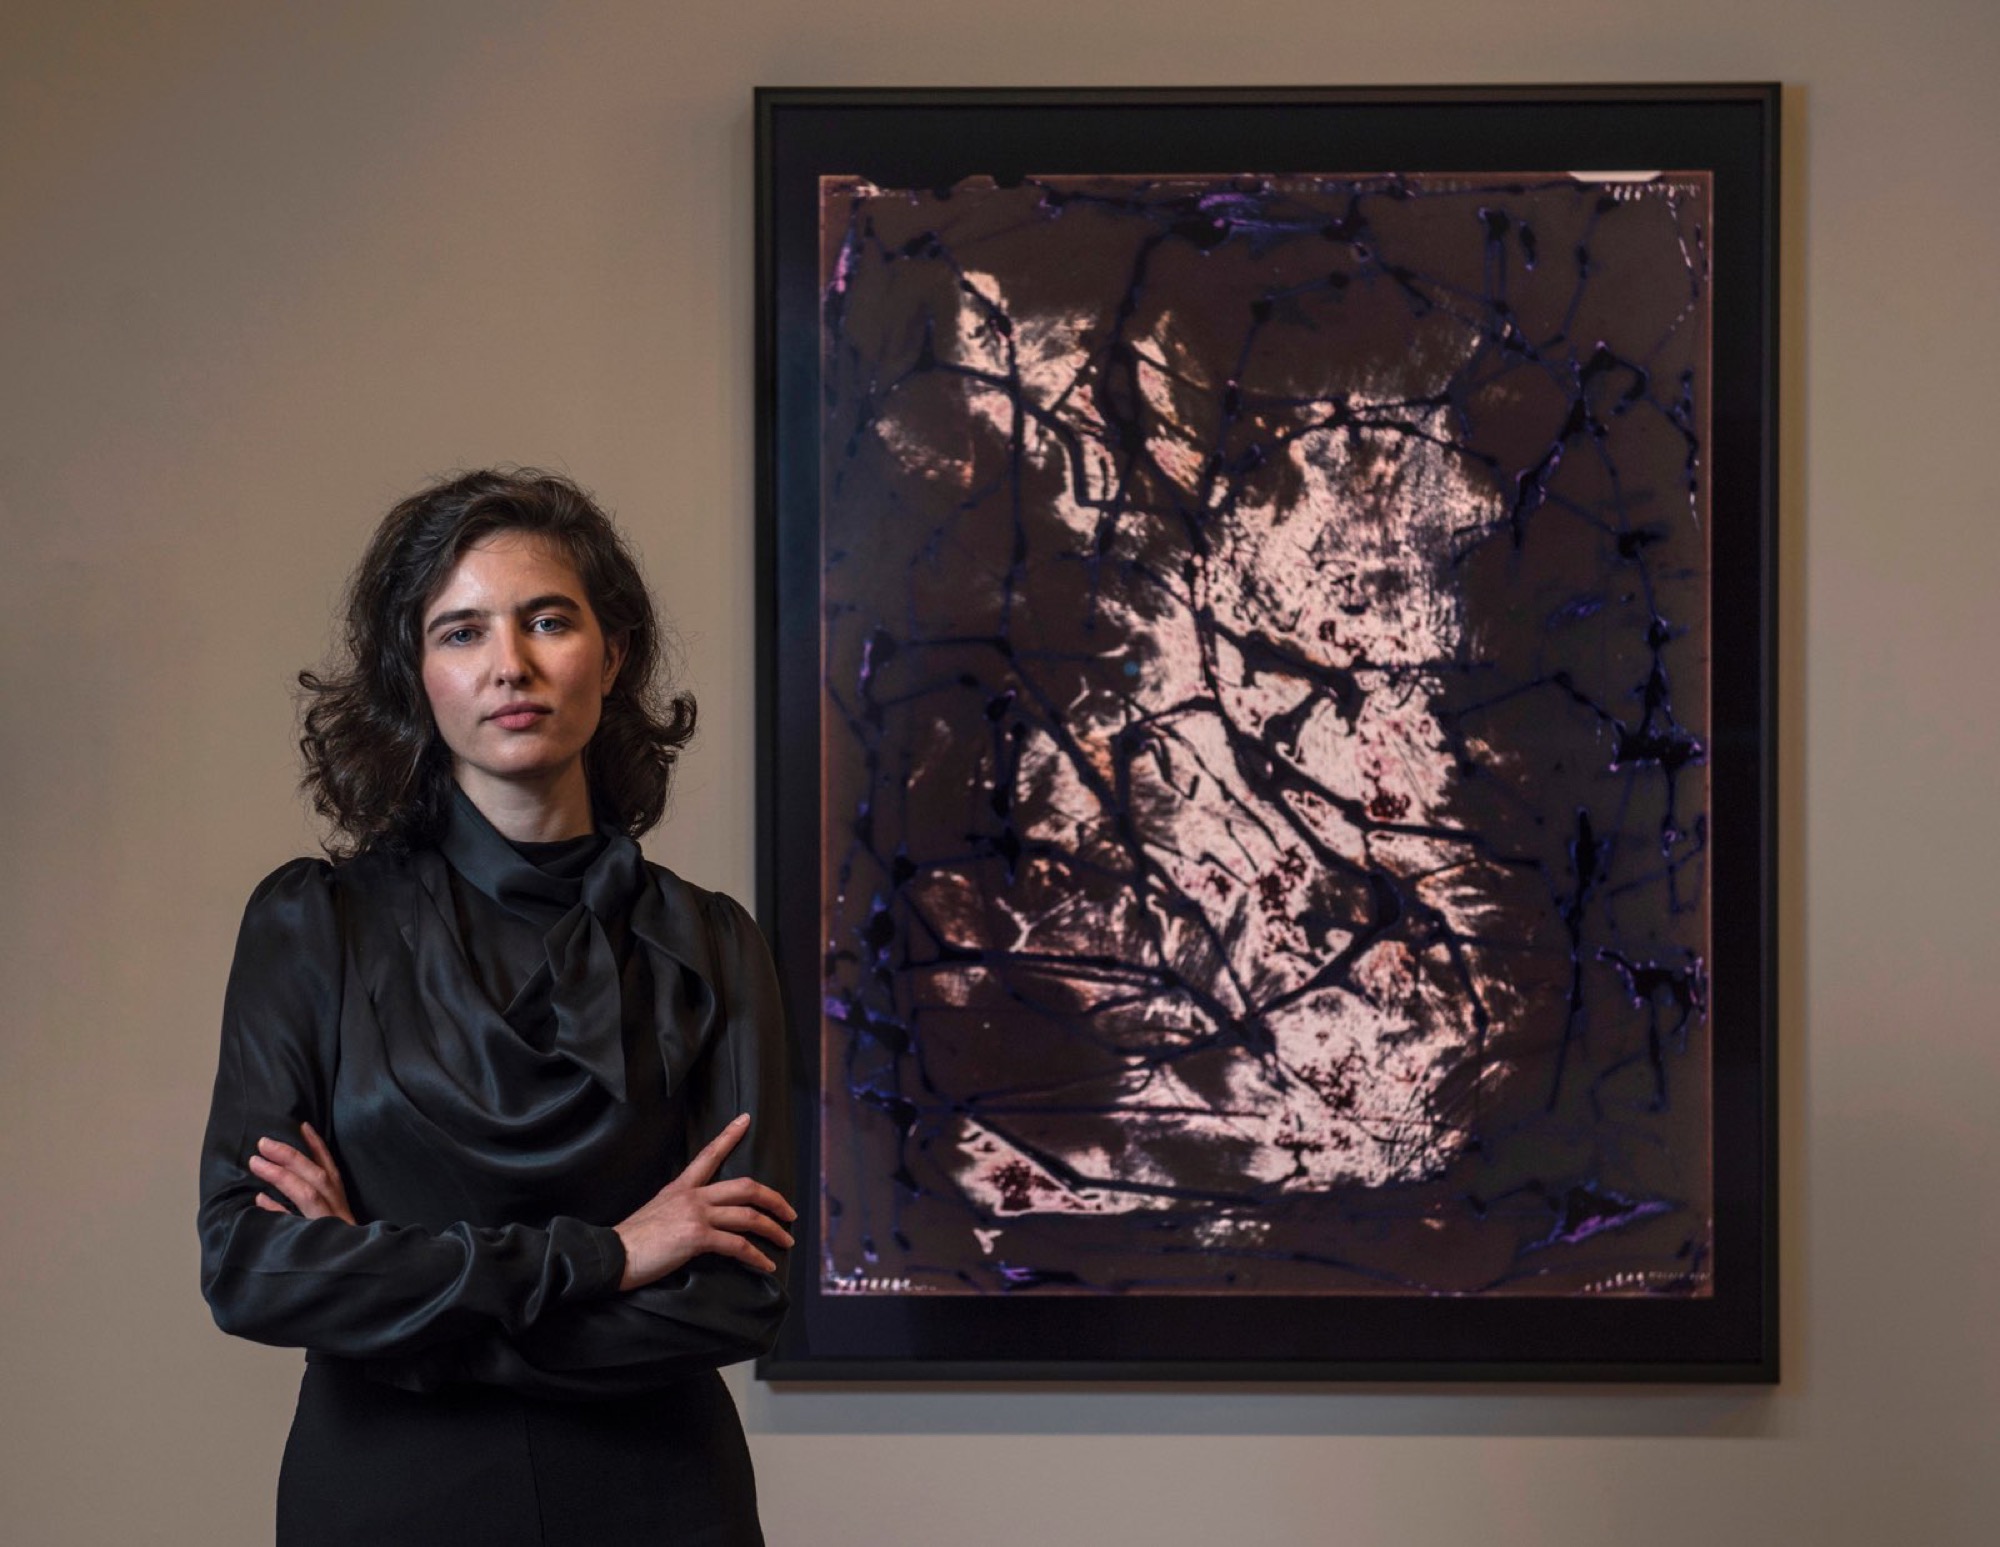 Justine Varga pictured with her winning 2019 Dobell Drawing Prize work Photogenic Drawing (2018). Photo by Peter Morgan, courtesy National Art School.